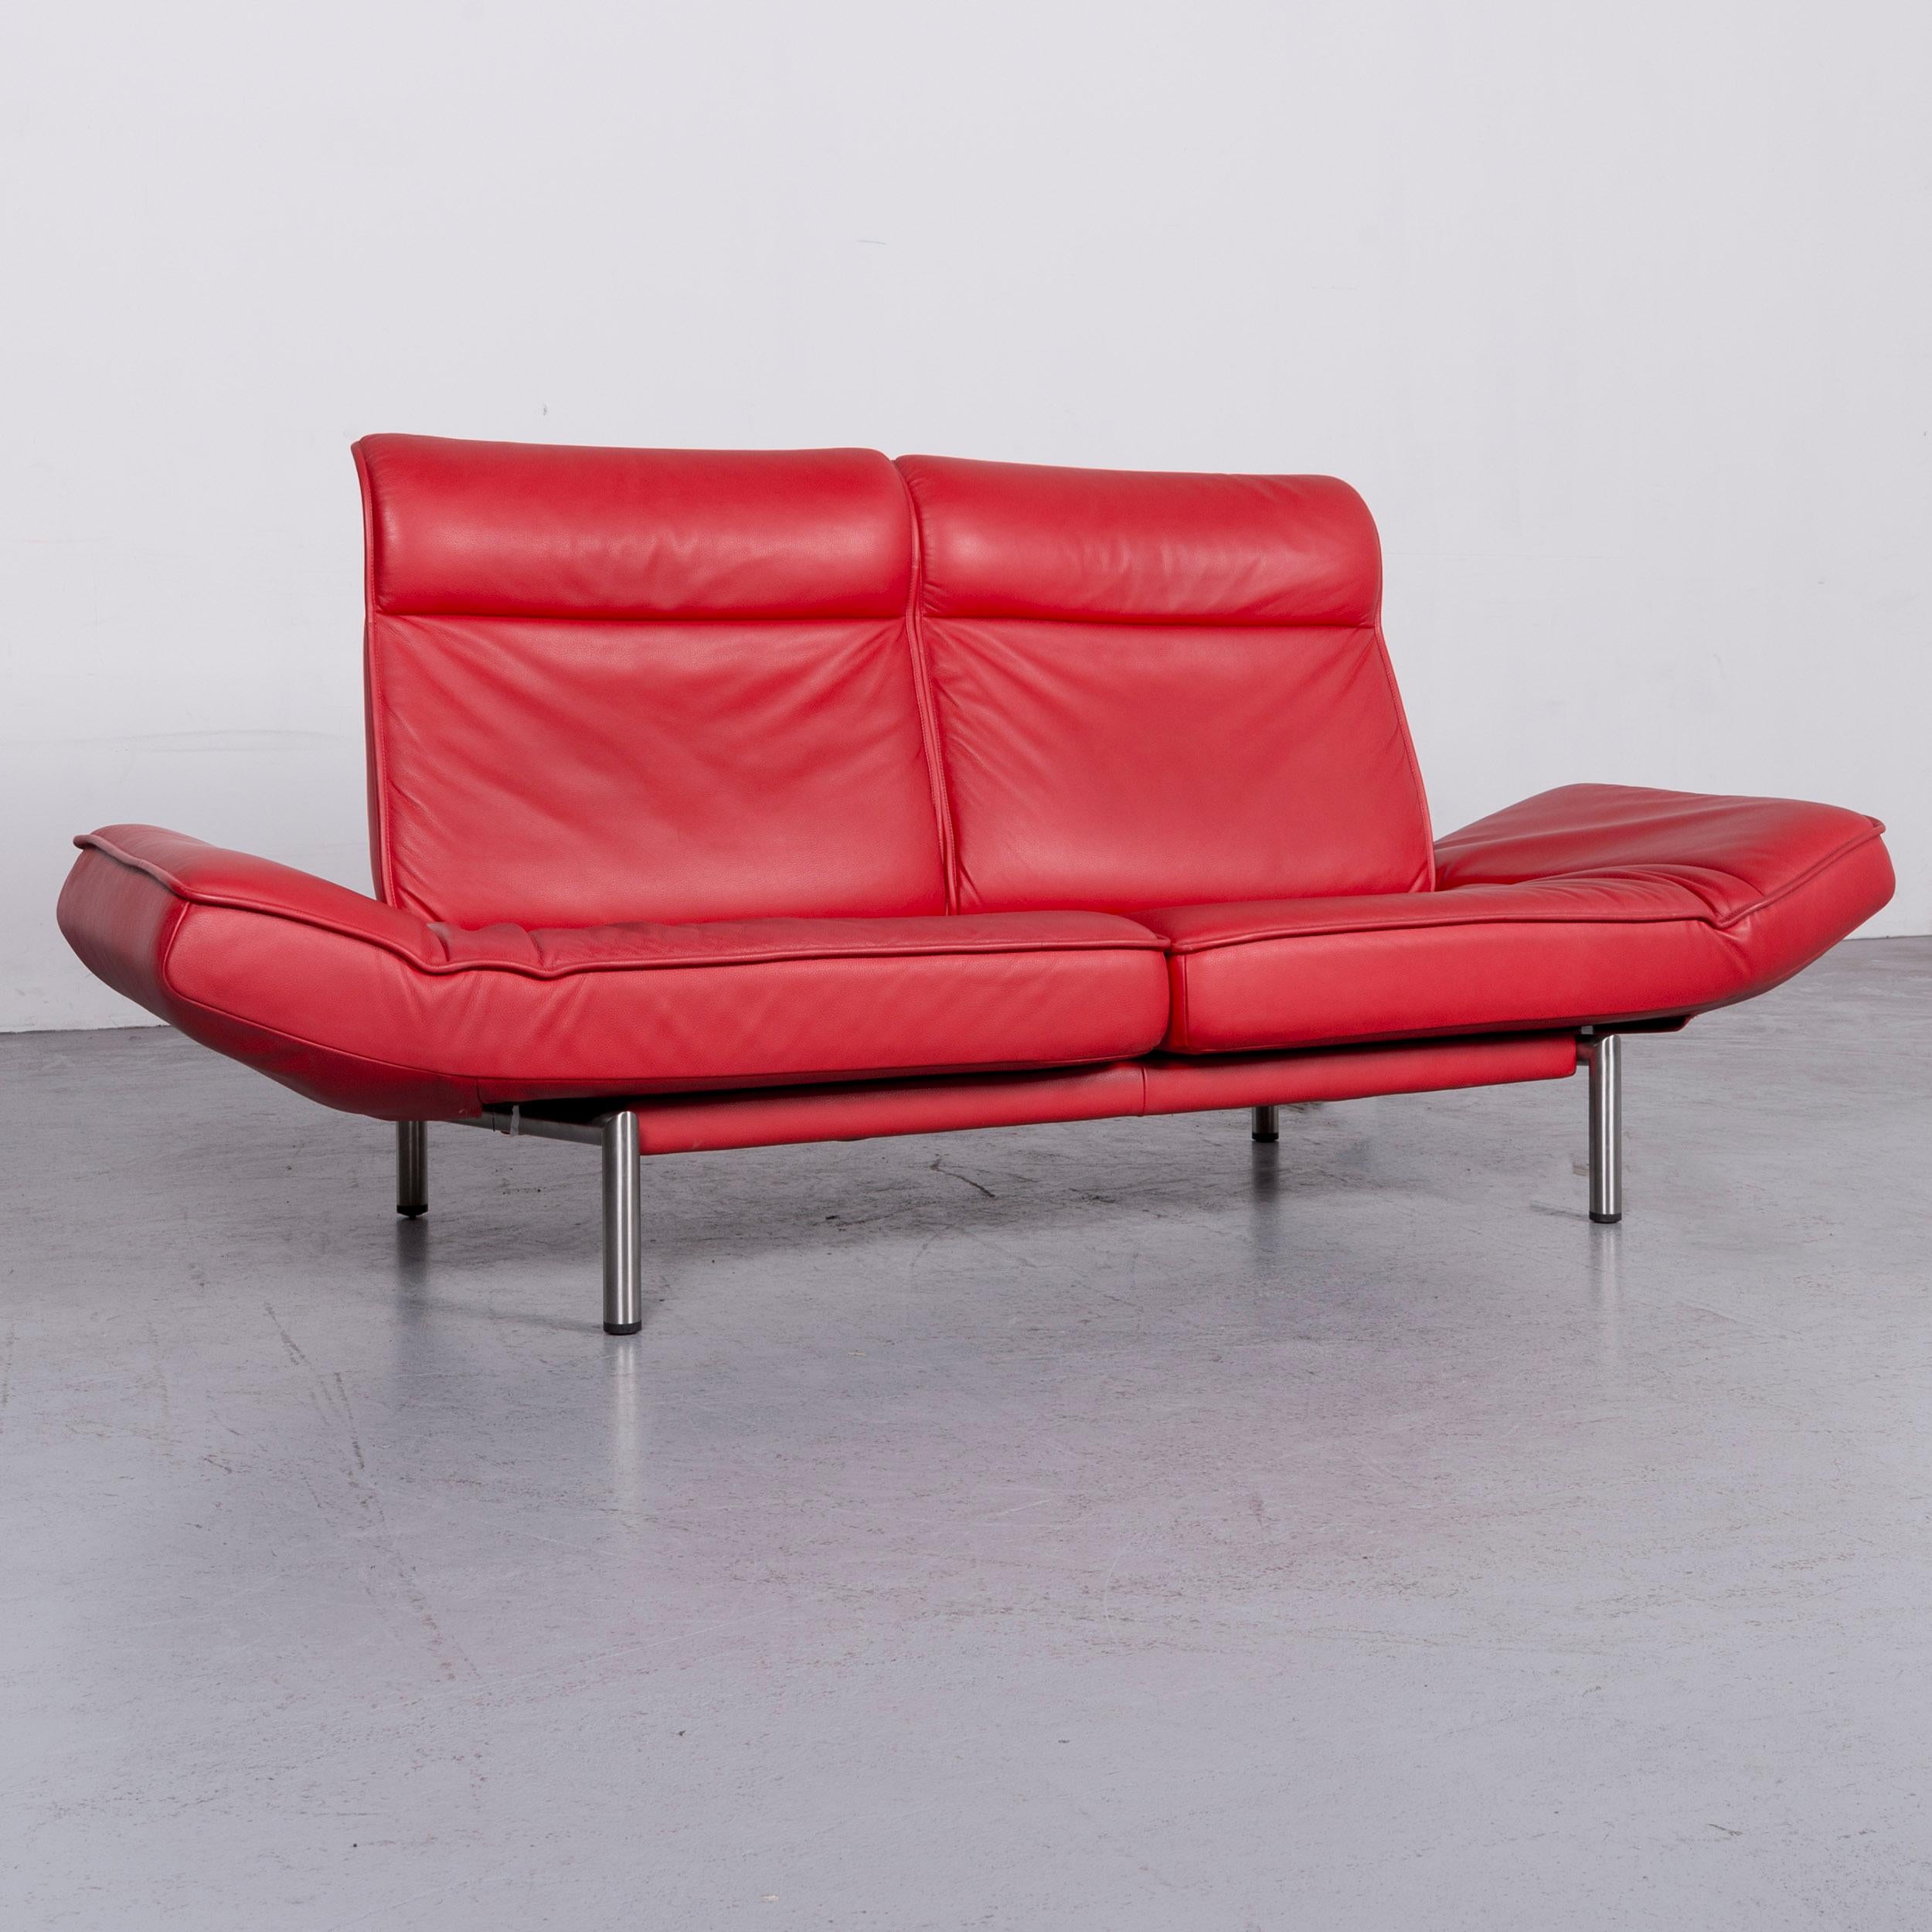 Swiss De Sede DS 450 Designer Sofa Red Leather Three-Seat Couch Made in Switzerland For Sale